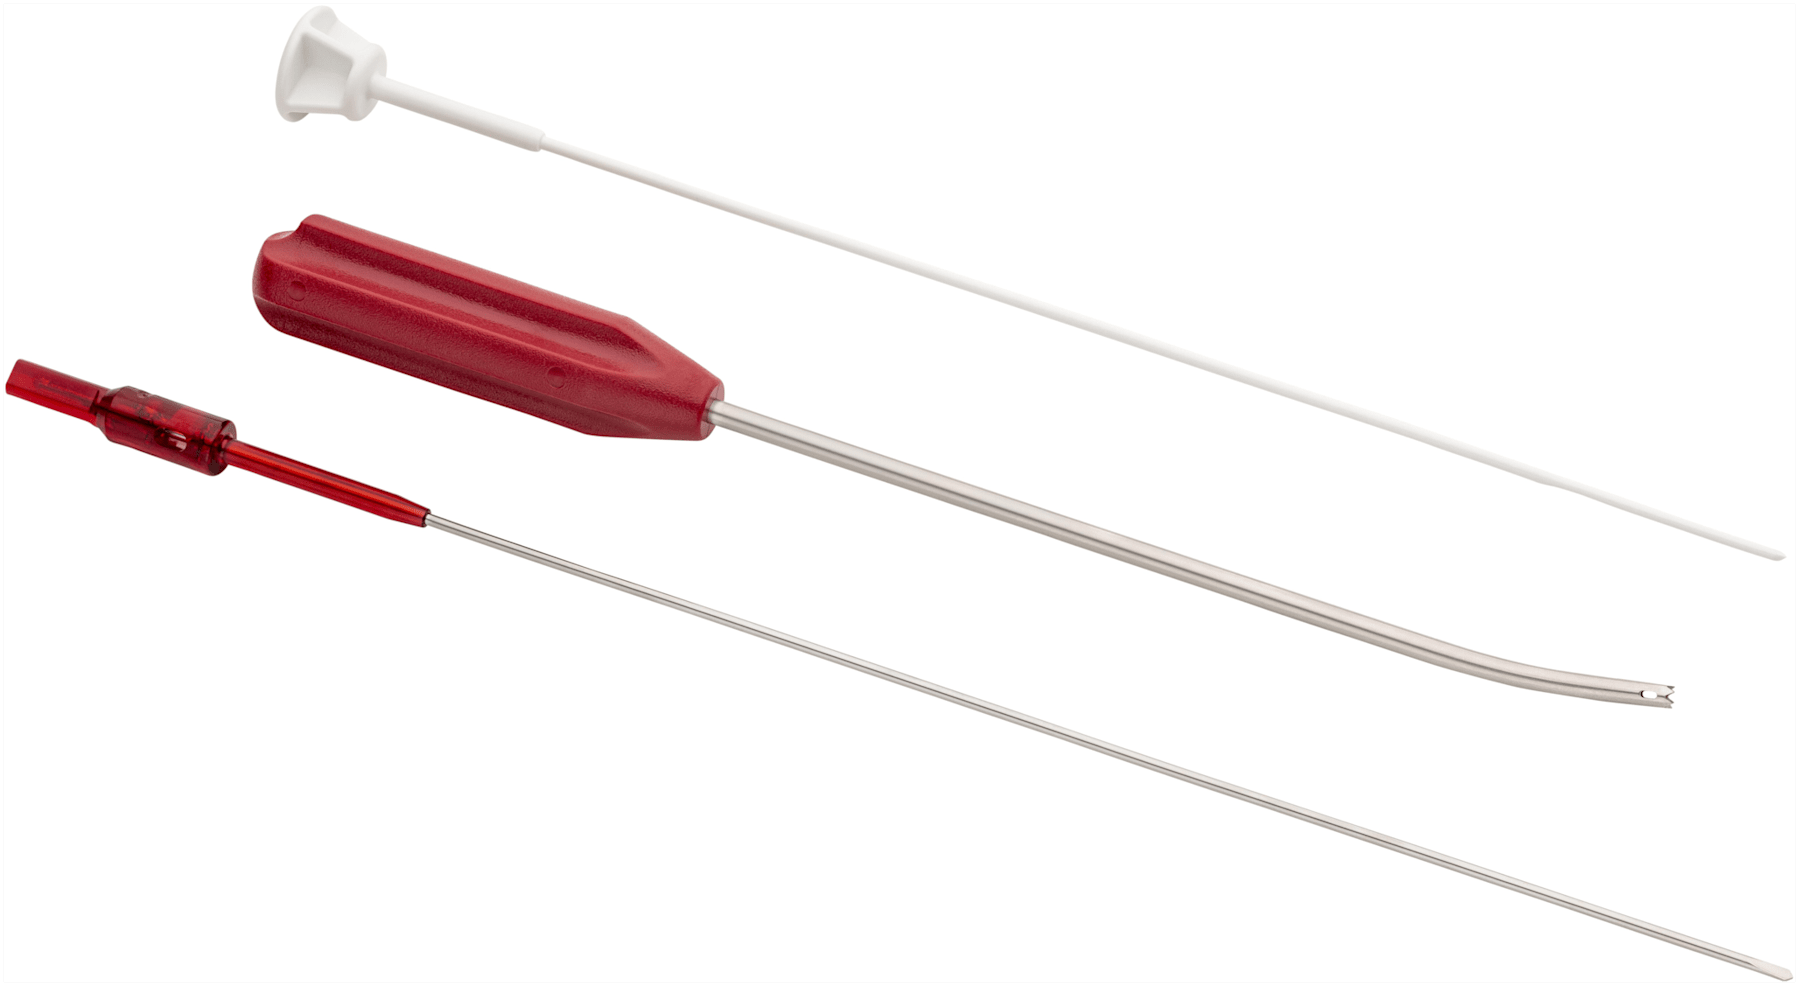 Disposables Kit, Curved Spear (Includes: Spear w/Circumferential Teeth, Blunt Obturator, 1.6 mm Flexible Drill)